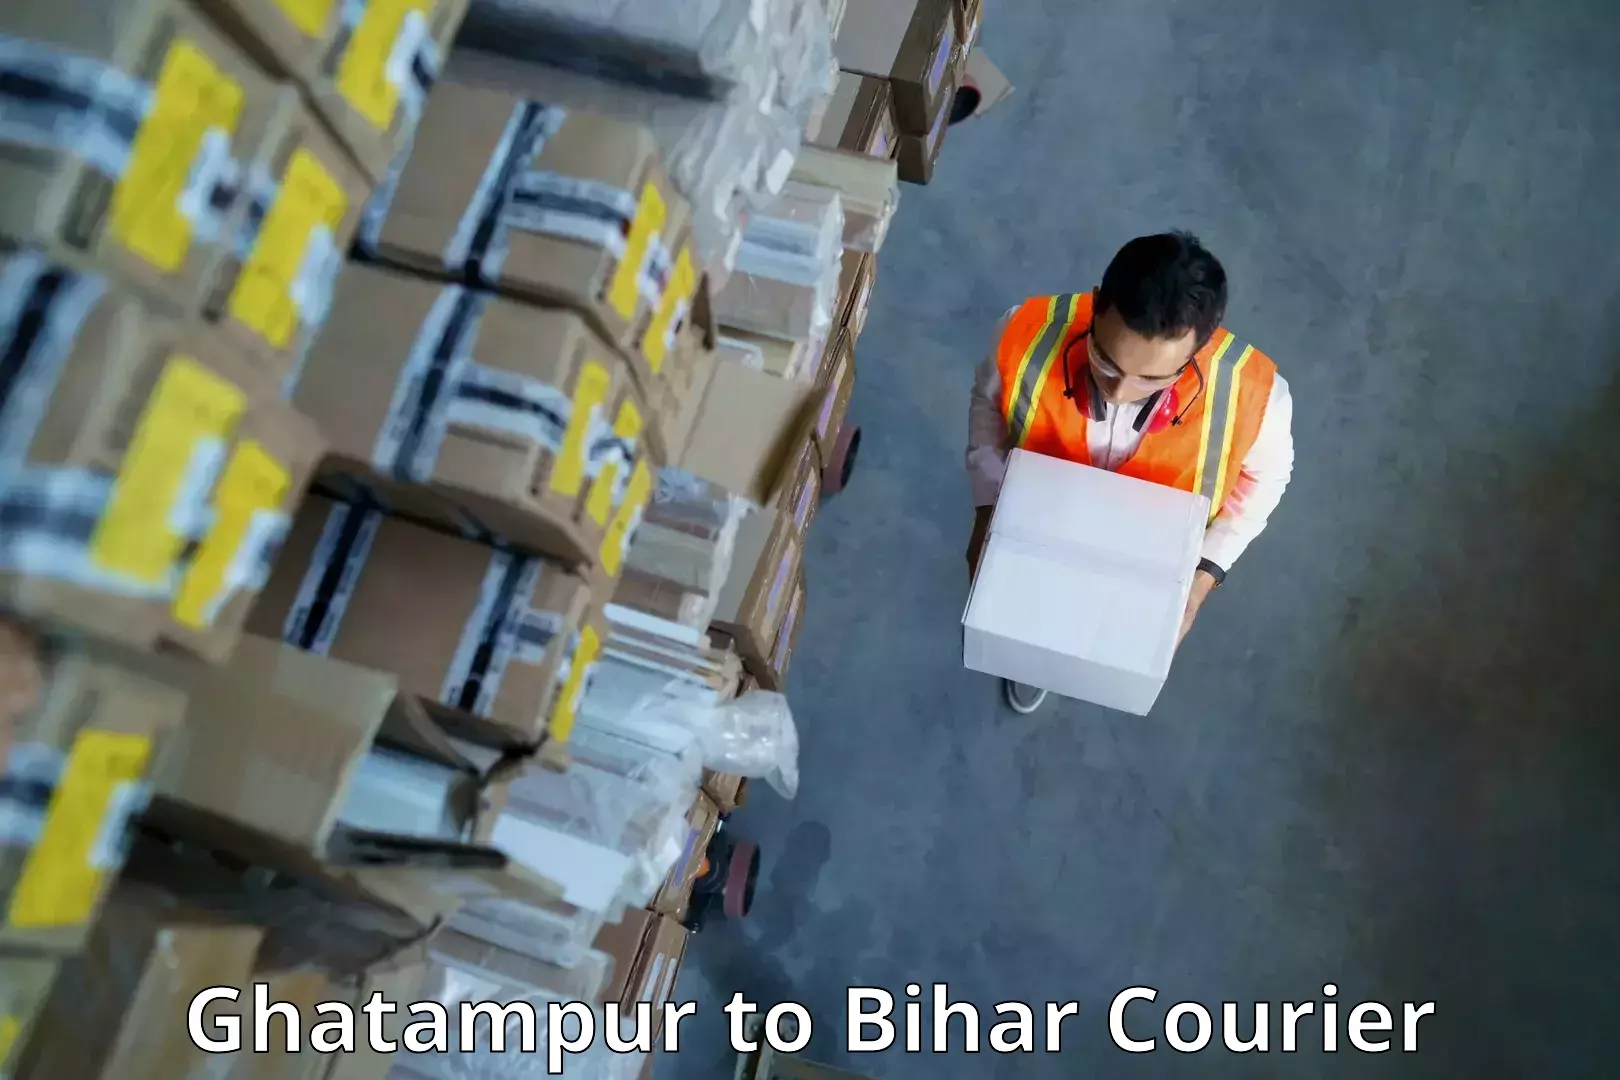 Courier service innovation in Ghatampur to Mahnar Bazar